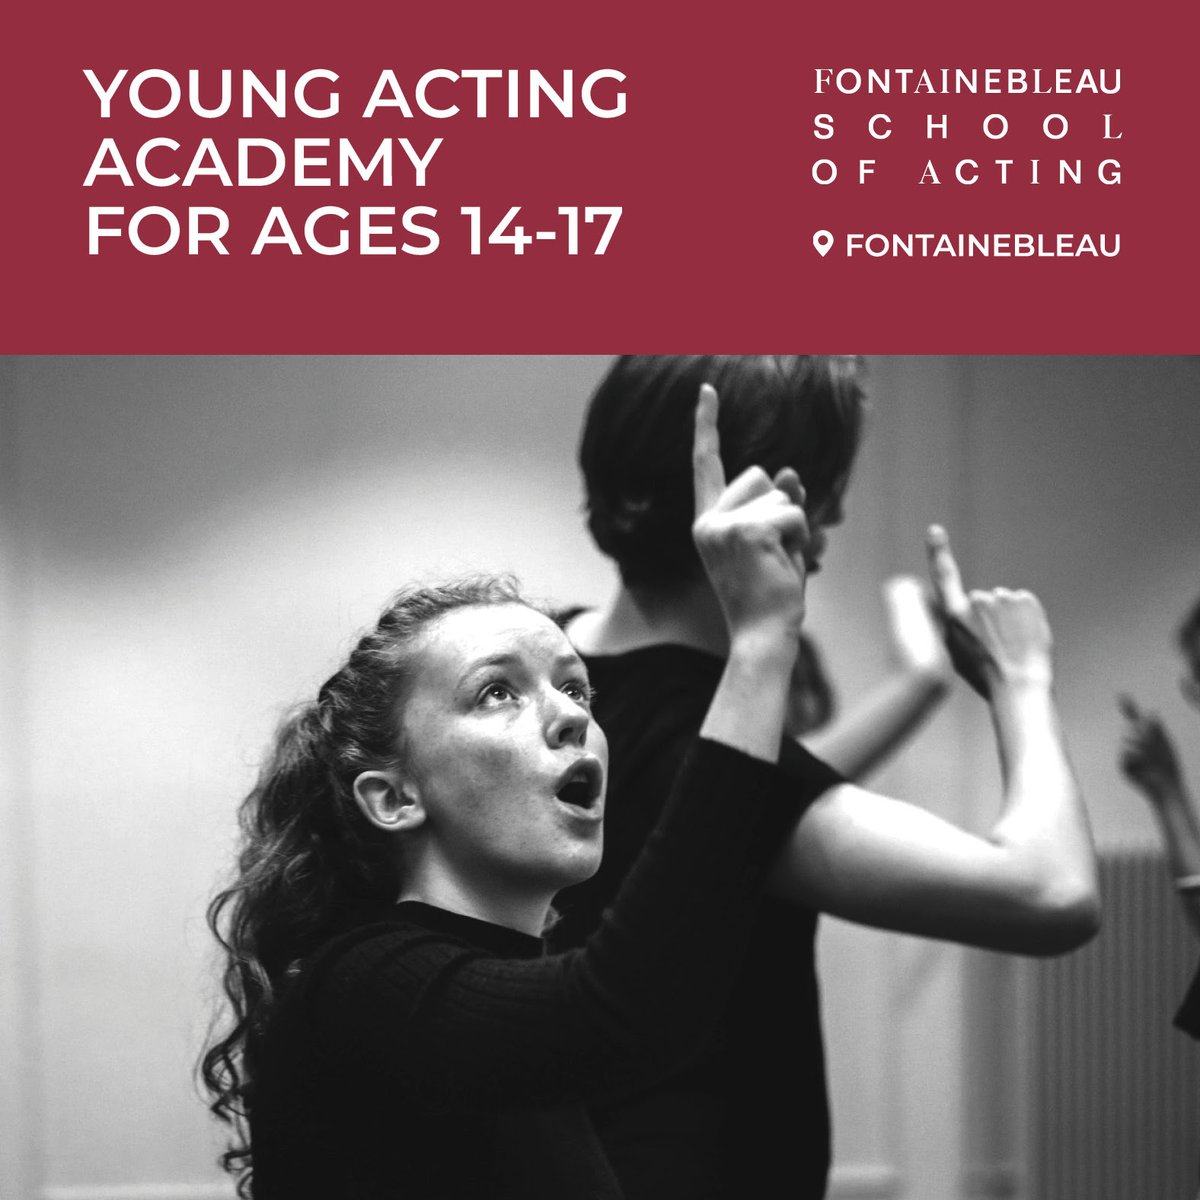 It's here - our new Young Acting Academy course!

Designed for 14 to 17 year olds looking to experience real #actortraining with top industry professionals.

#Fontainebleau campus, 10th - 15th July 2023

Contact applications@fonact.com for more information💫

#acting #youngadults